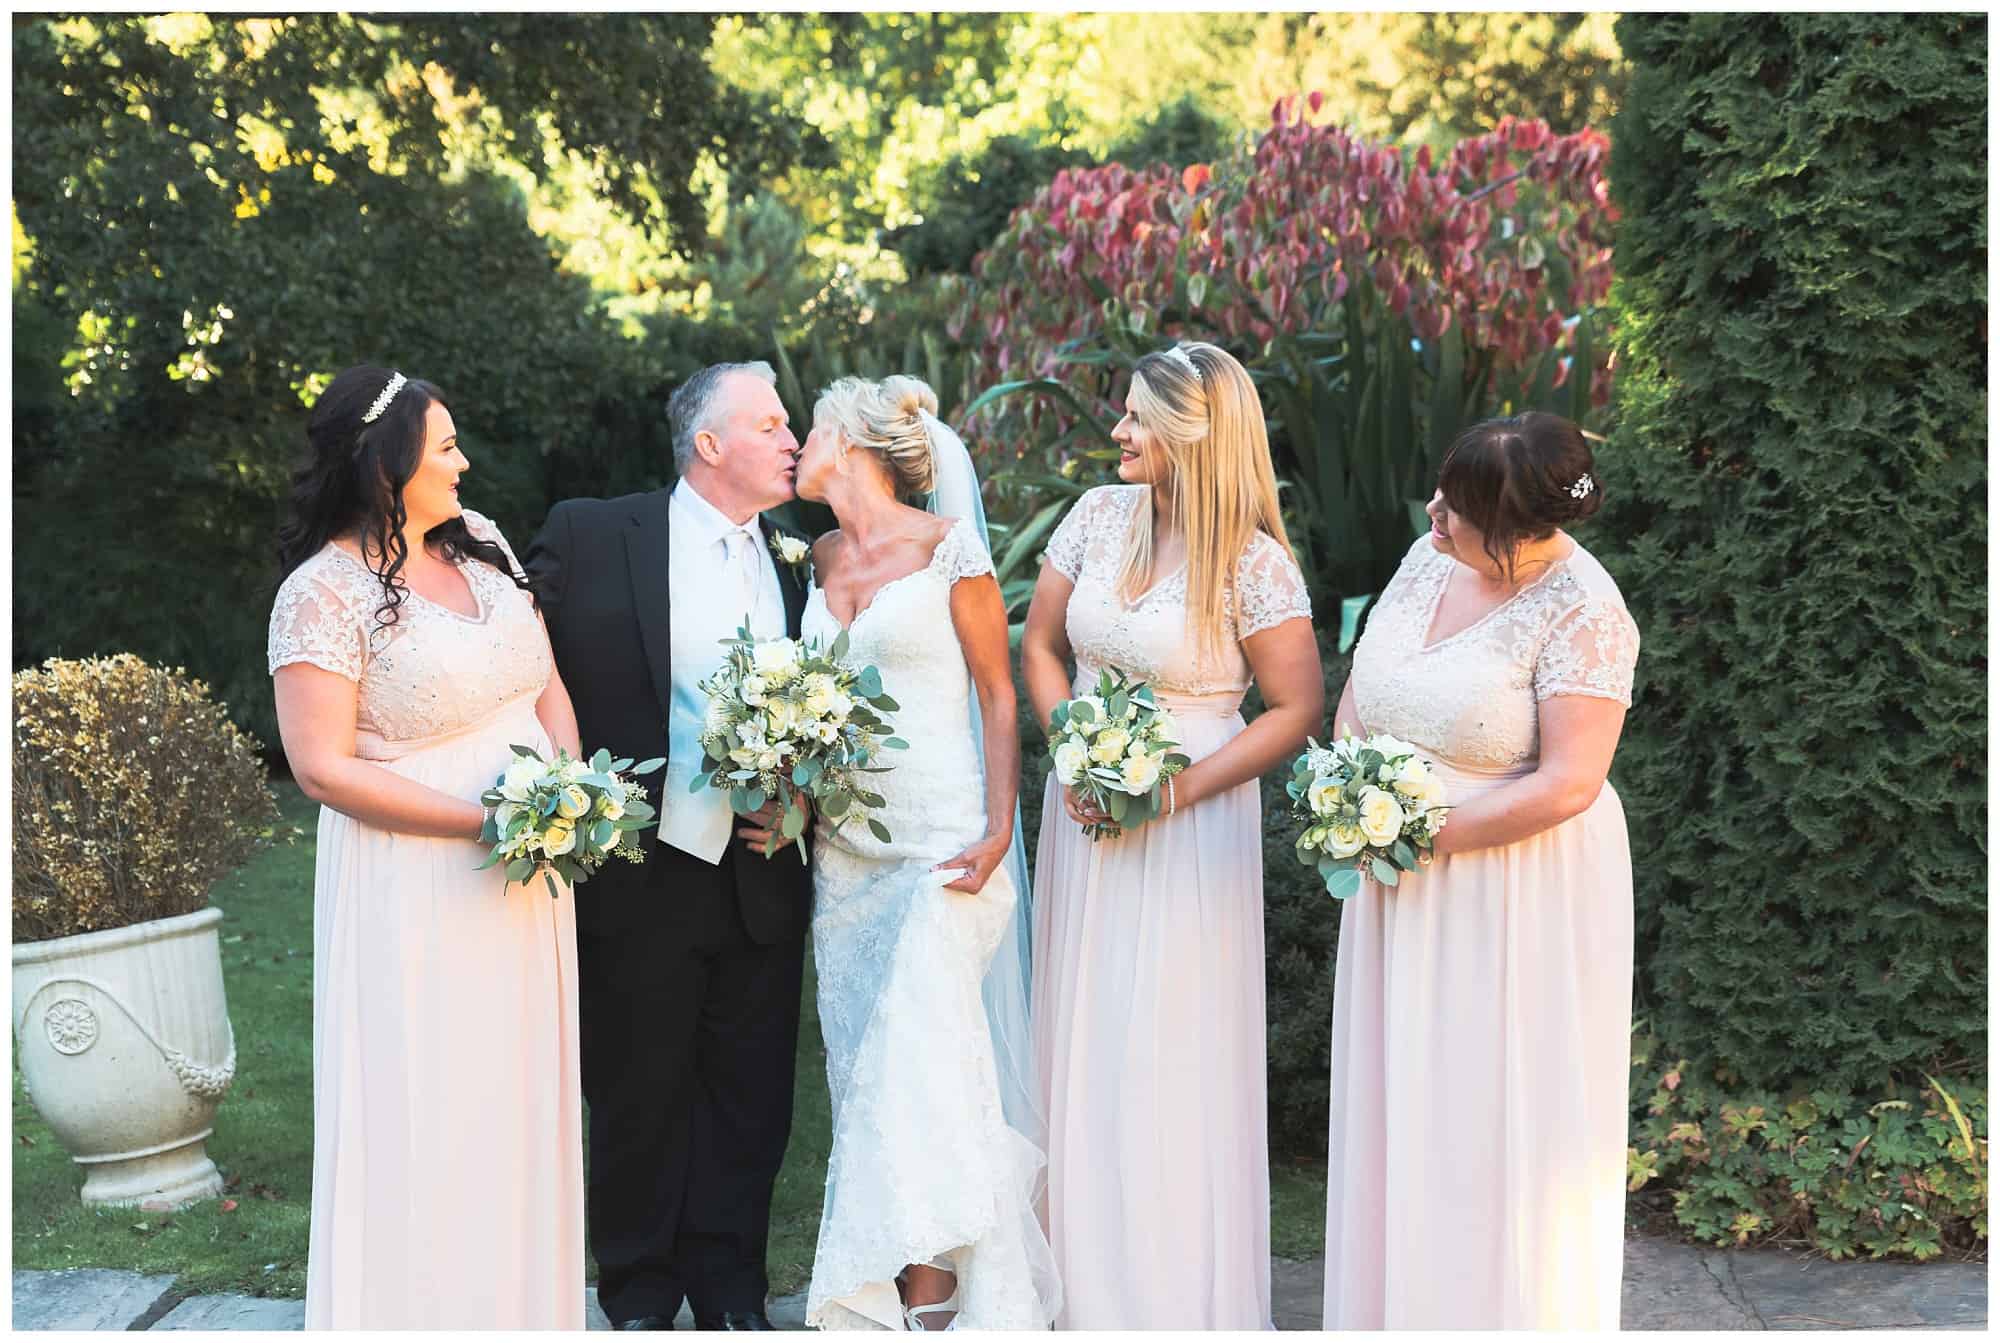 Whitley Hall Hotel Wedding - outside bride and groom kissing with bridesmaids looking speechless